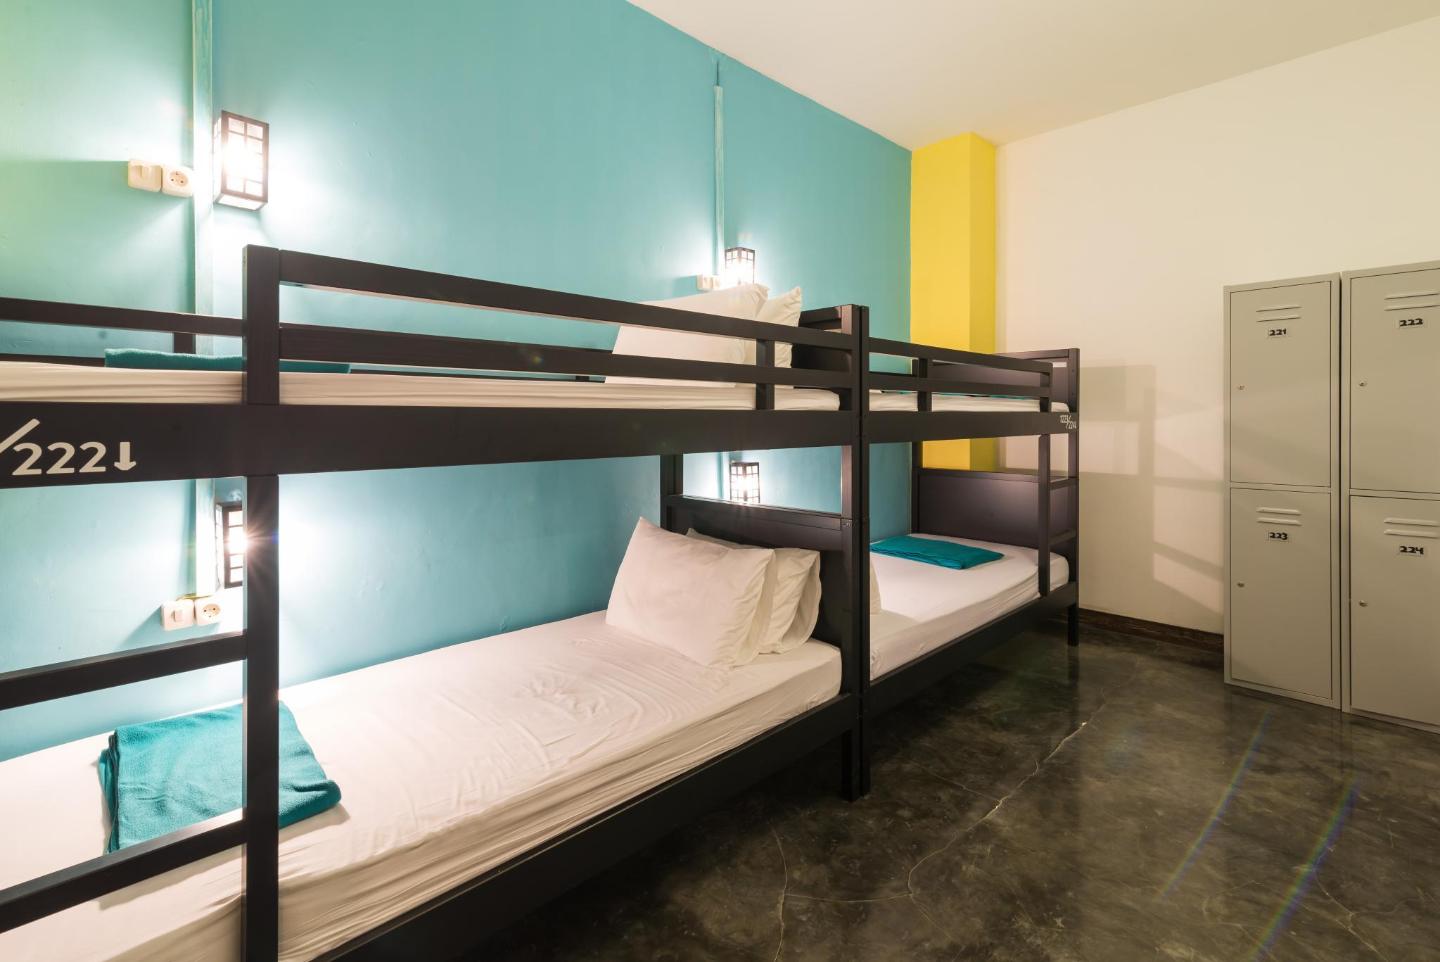 10 Top-Rated Hostels hotels in Jakarta